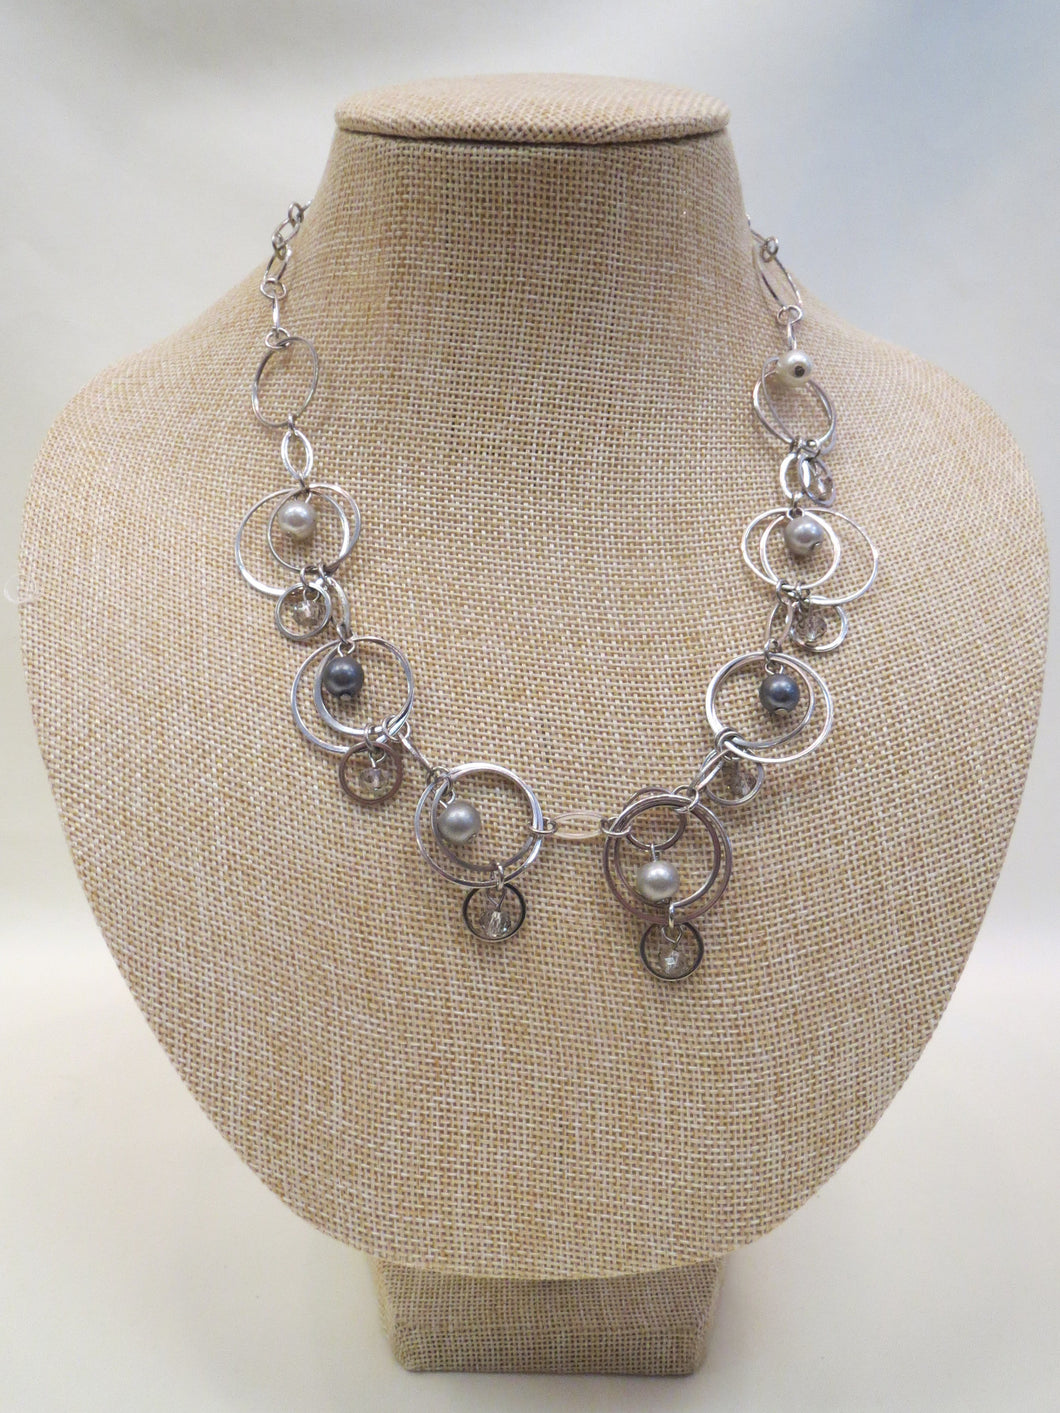 ADO Silver Linked Necklace with Pearls | All Dec'd Out